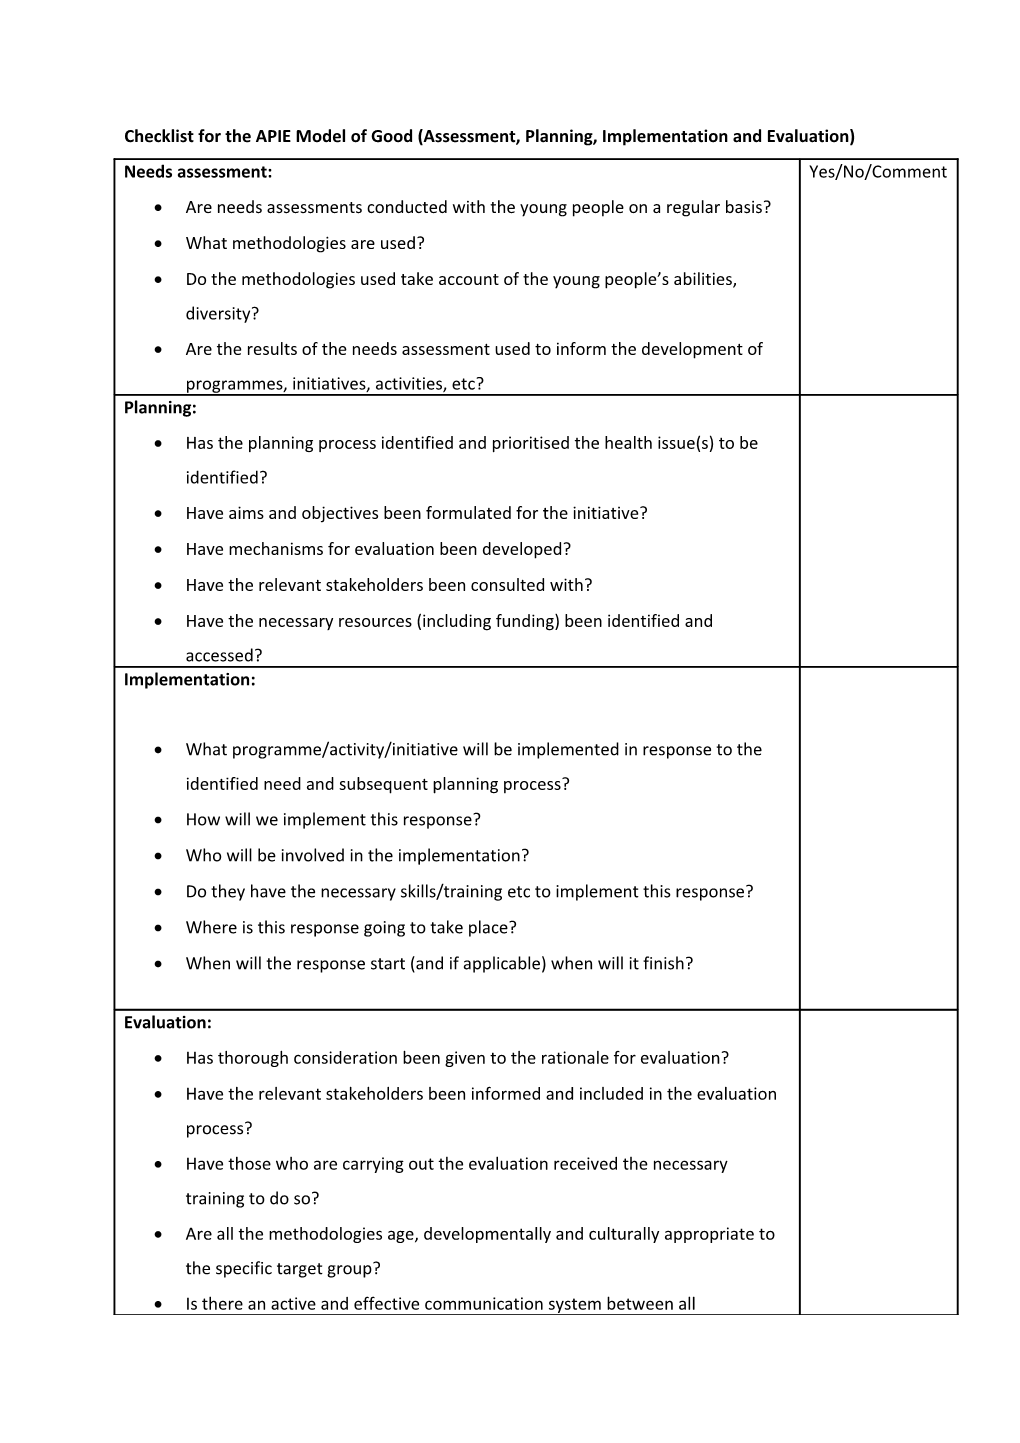 Checklist for the APIE Model of Good (Assessment, Planning, Implementation and Evaluation)